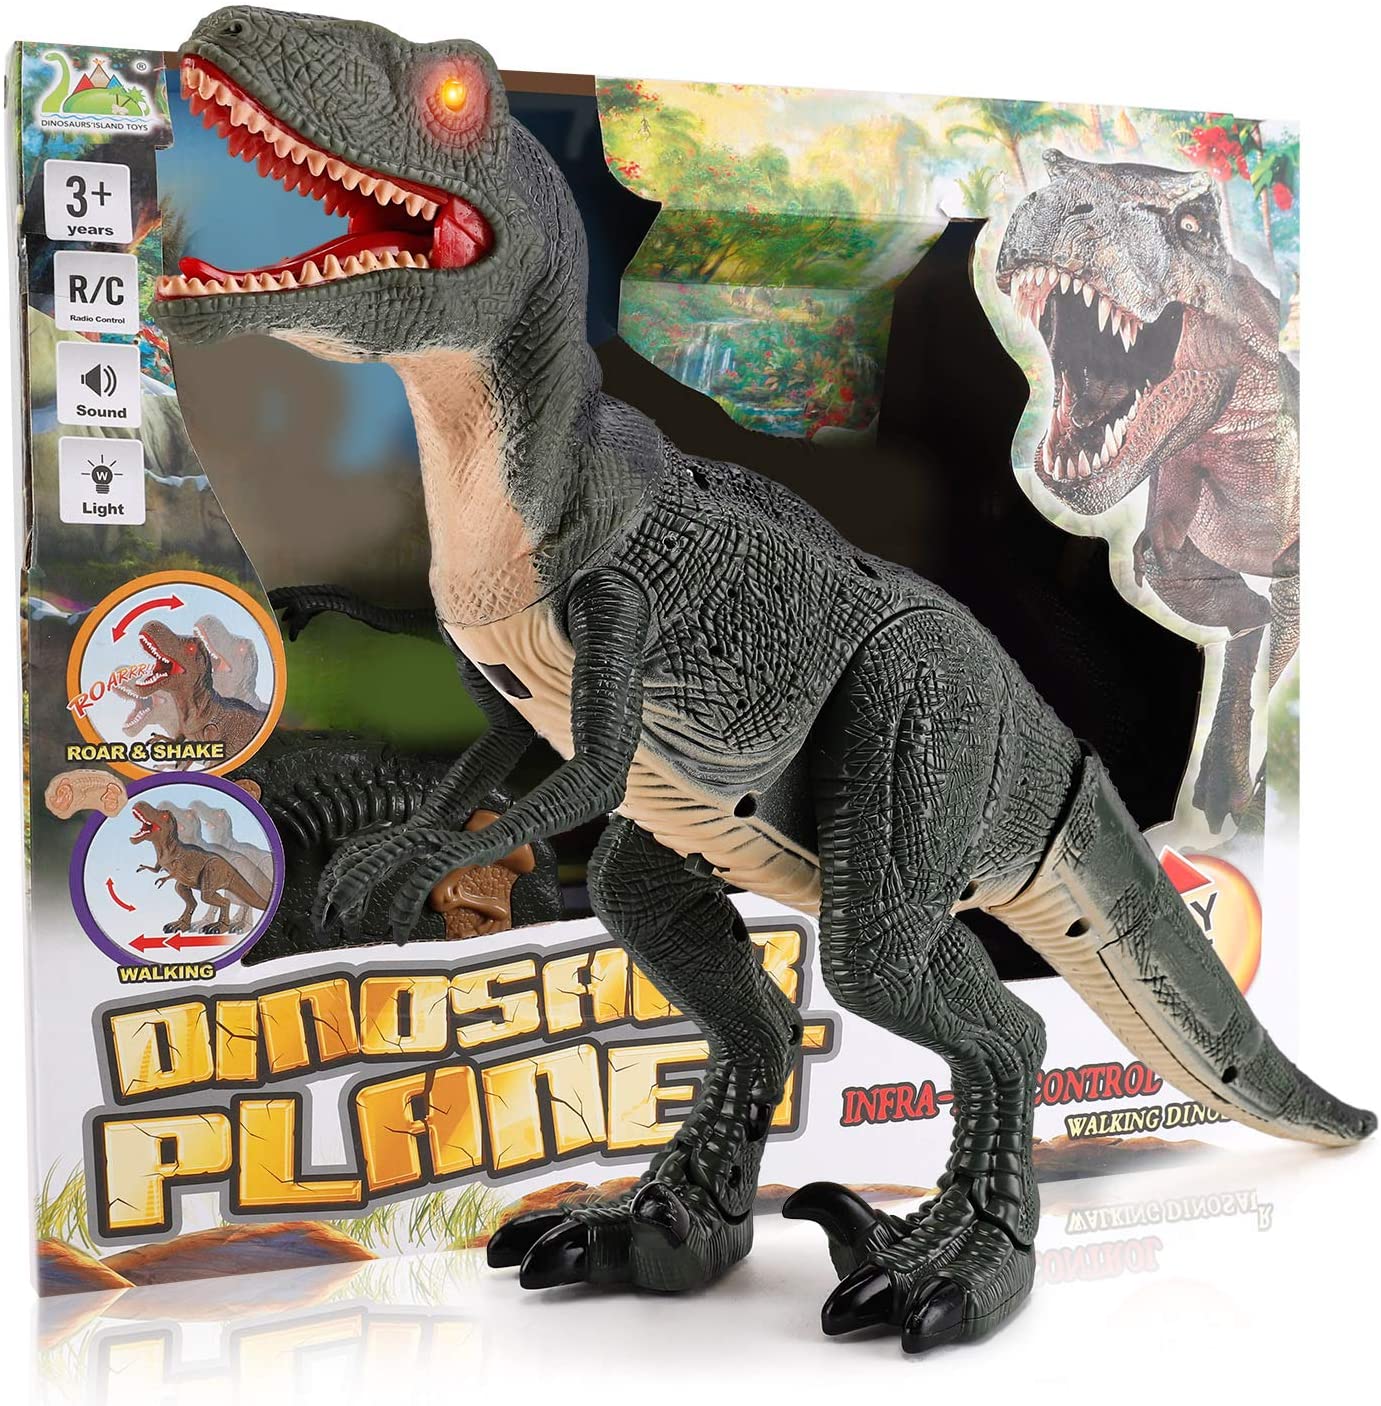 Walking Velociraptor Dinosaur Toy with Remote Control and Lights